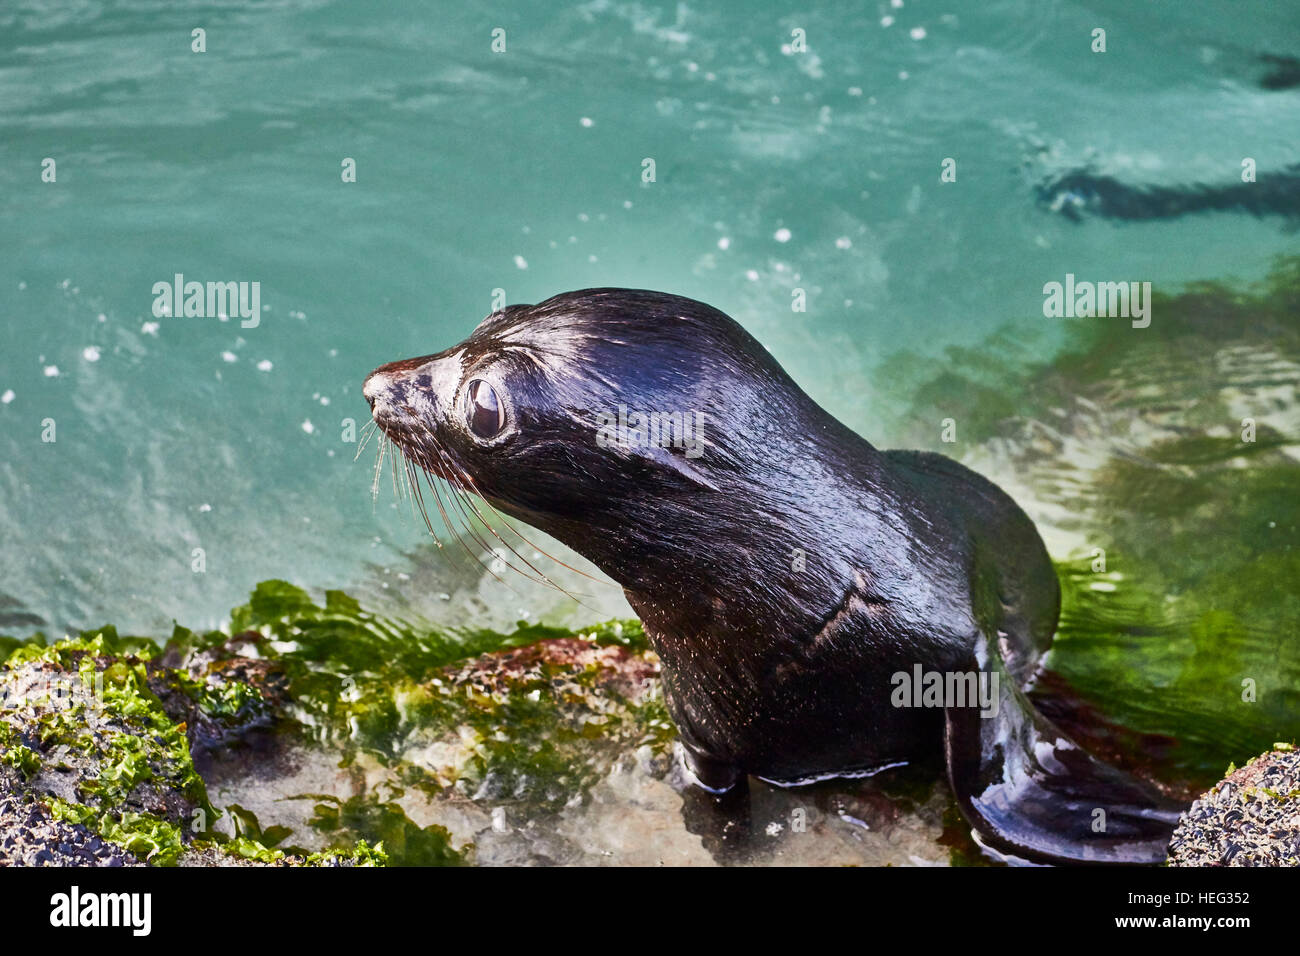 New Zealand, south island, Wharariki, local young fur seal in the water, young animal Stock Photo